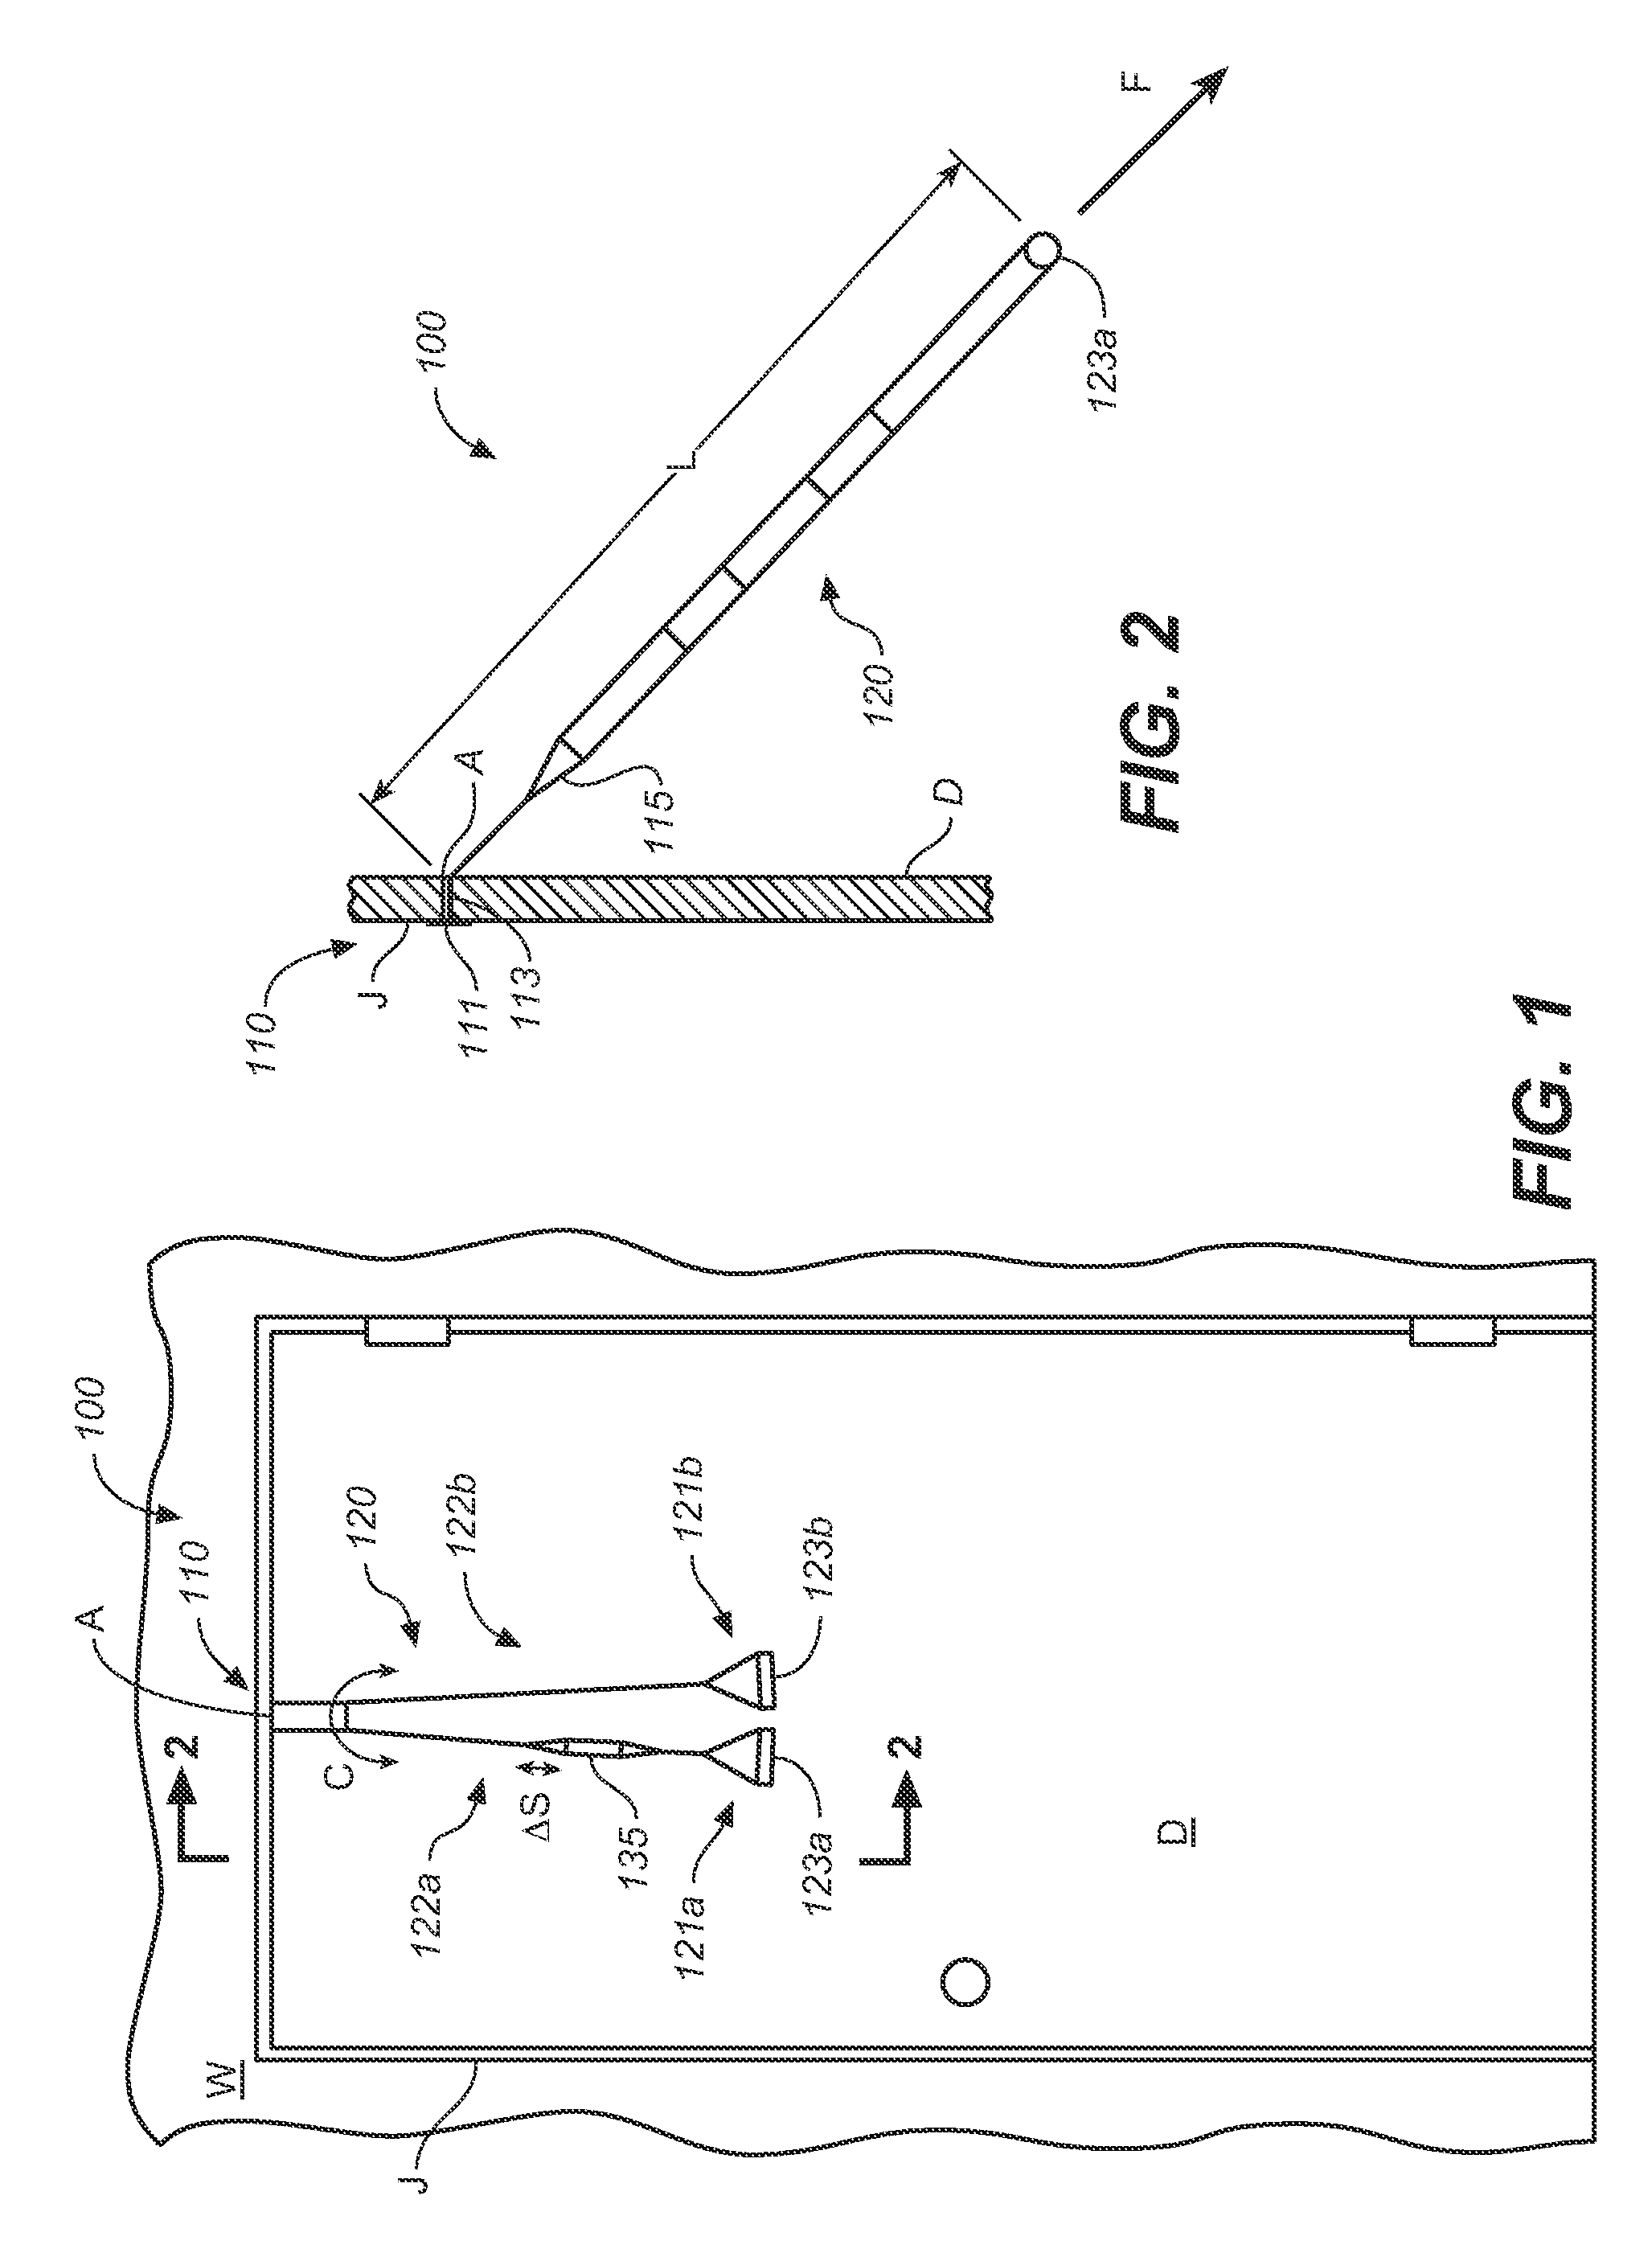 Exercise device having inelastic straps and interchangeable parts